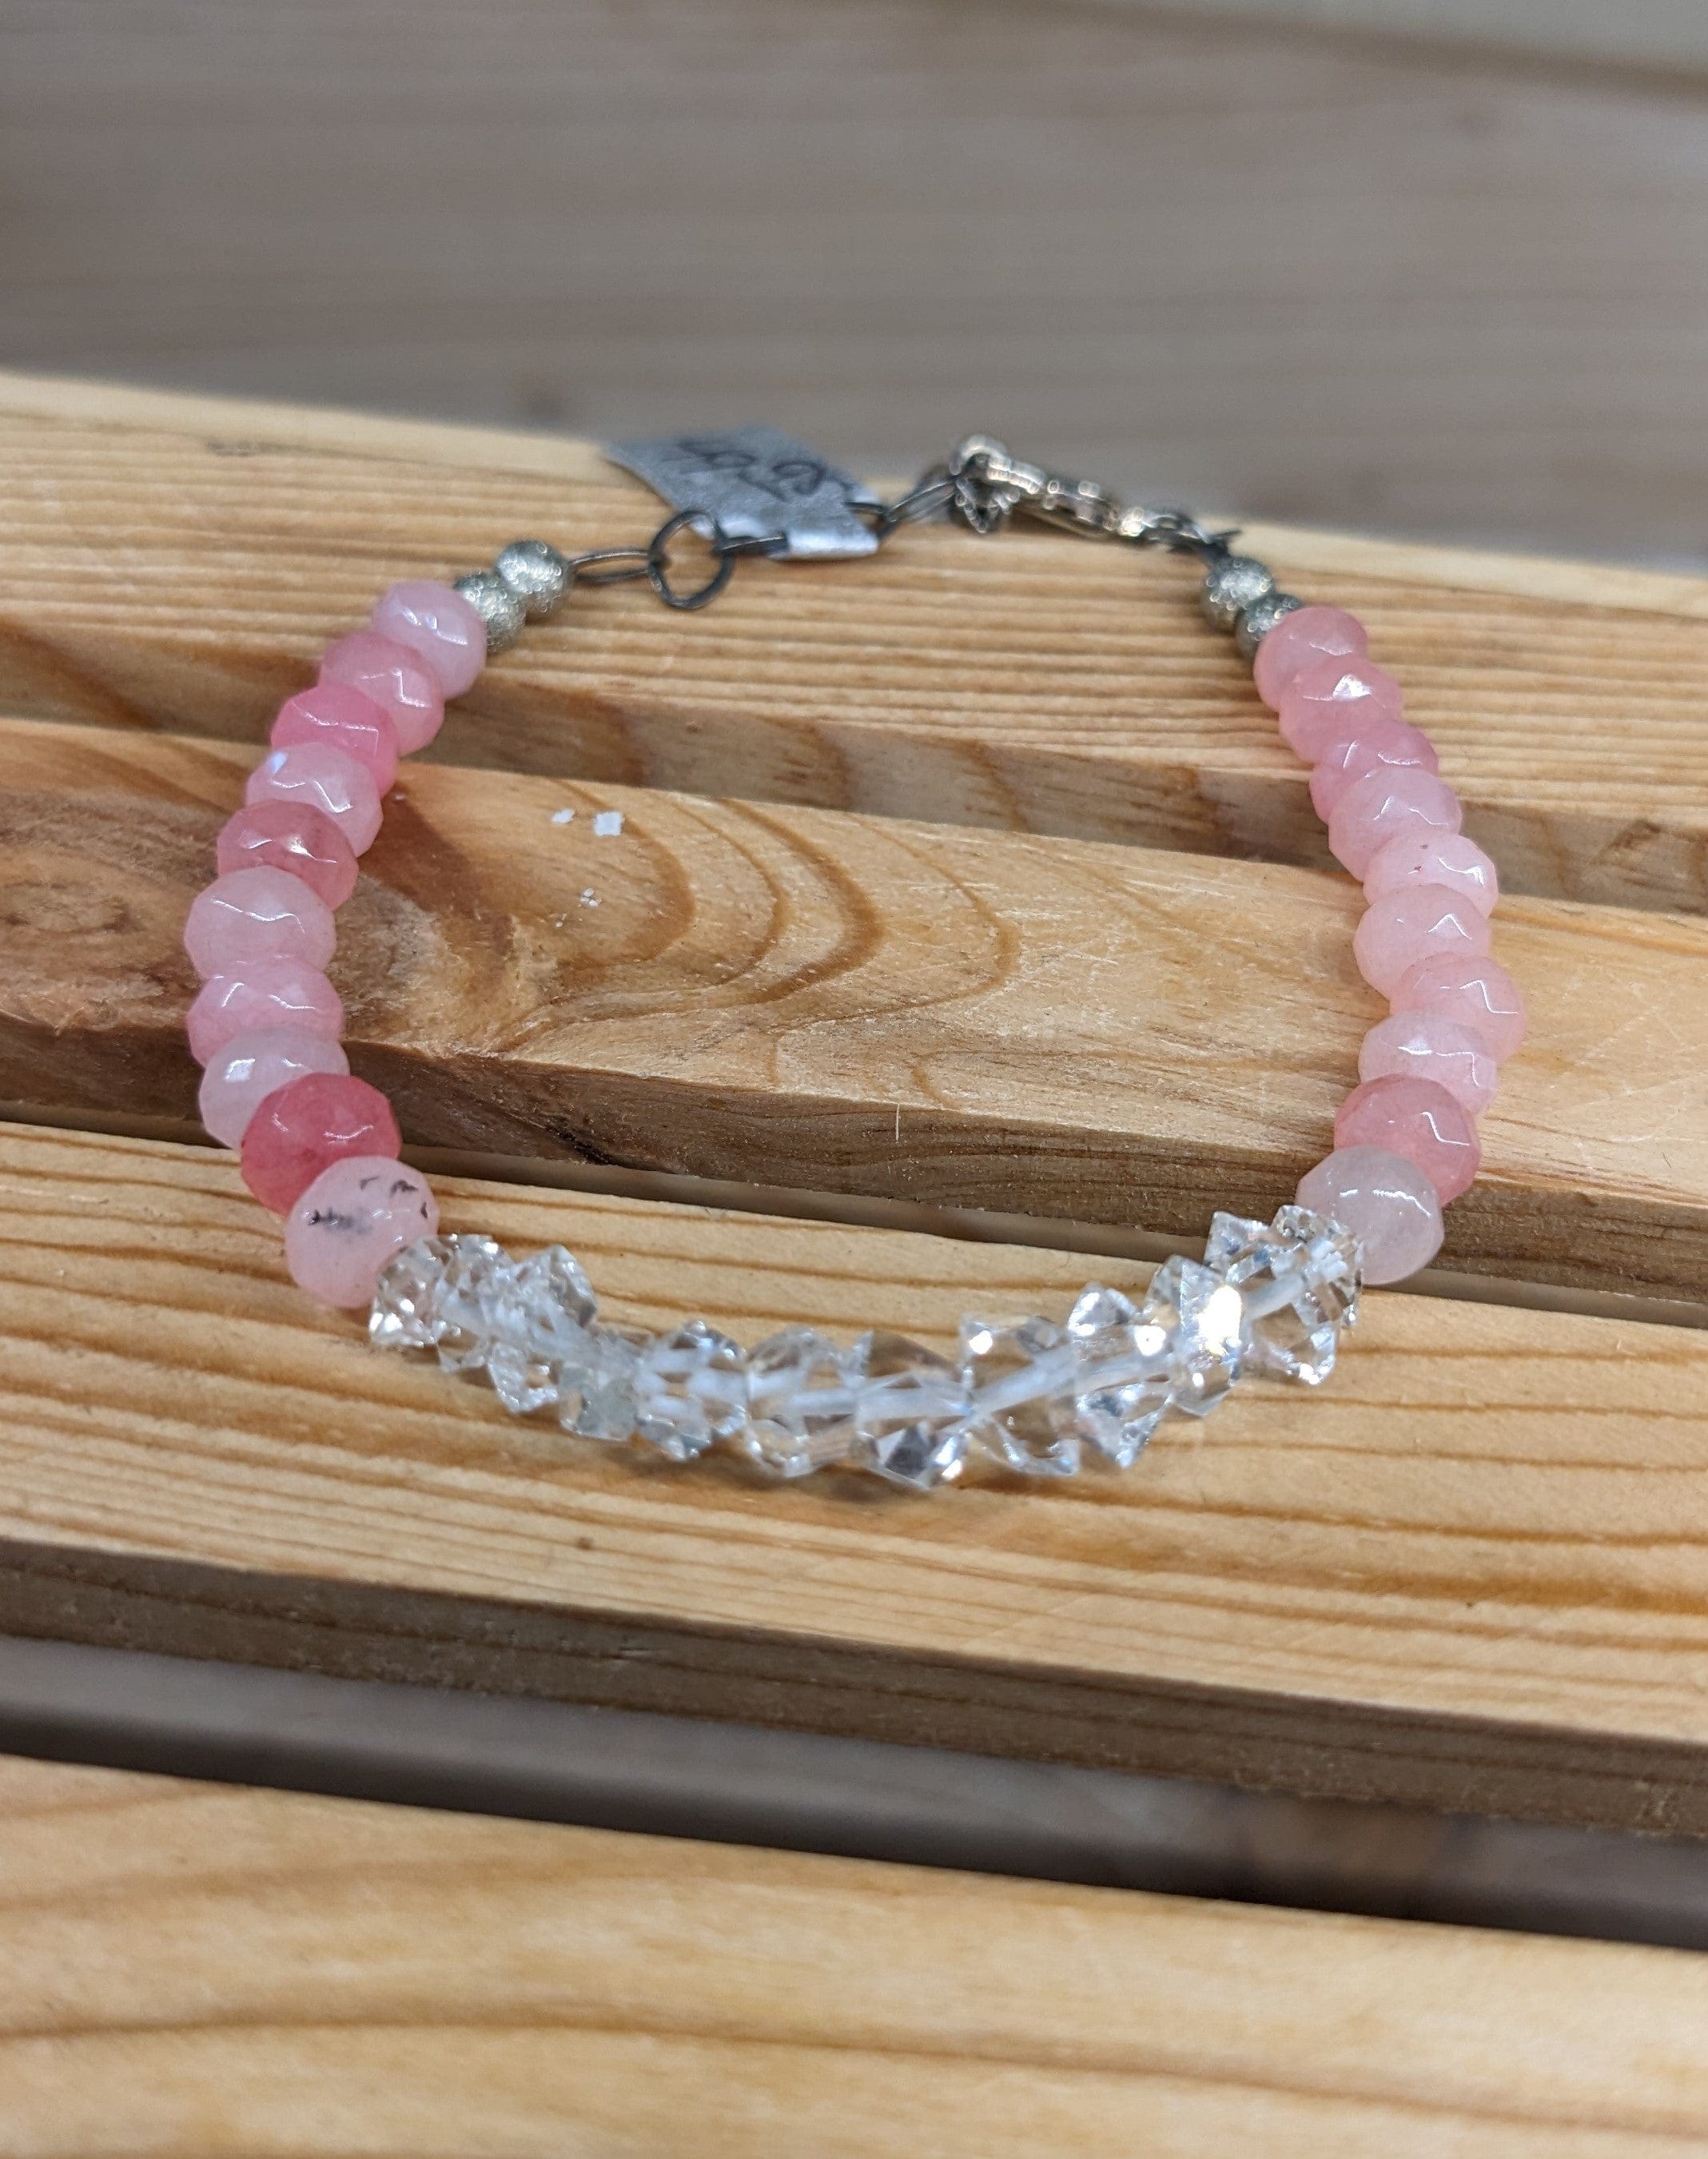 Caribbean Blue or Pink Chalcedony and Herkimer Diamond Bracelets-HANDMADE with love! 925 Silver Clasp